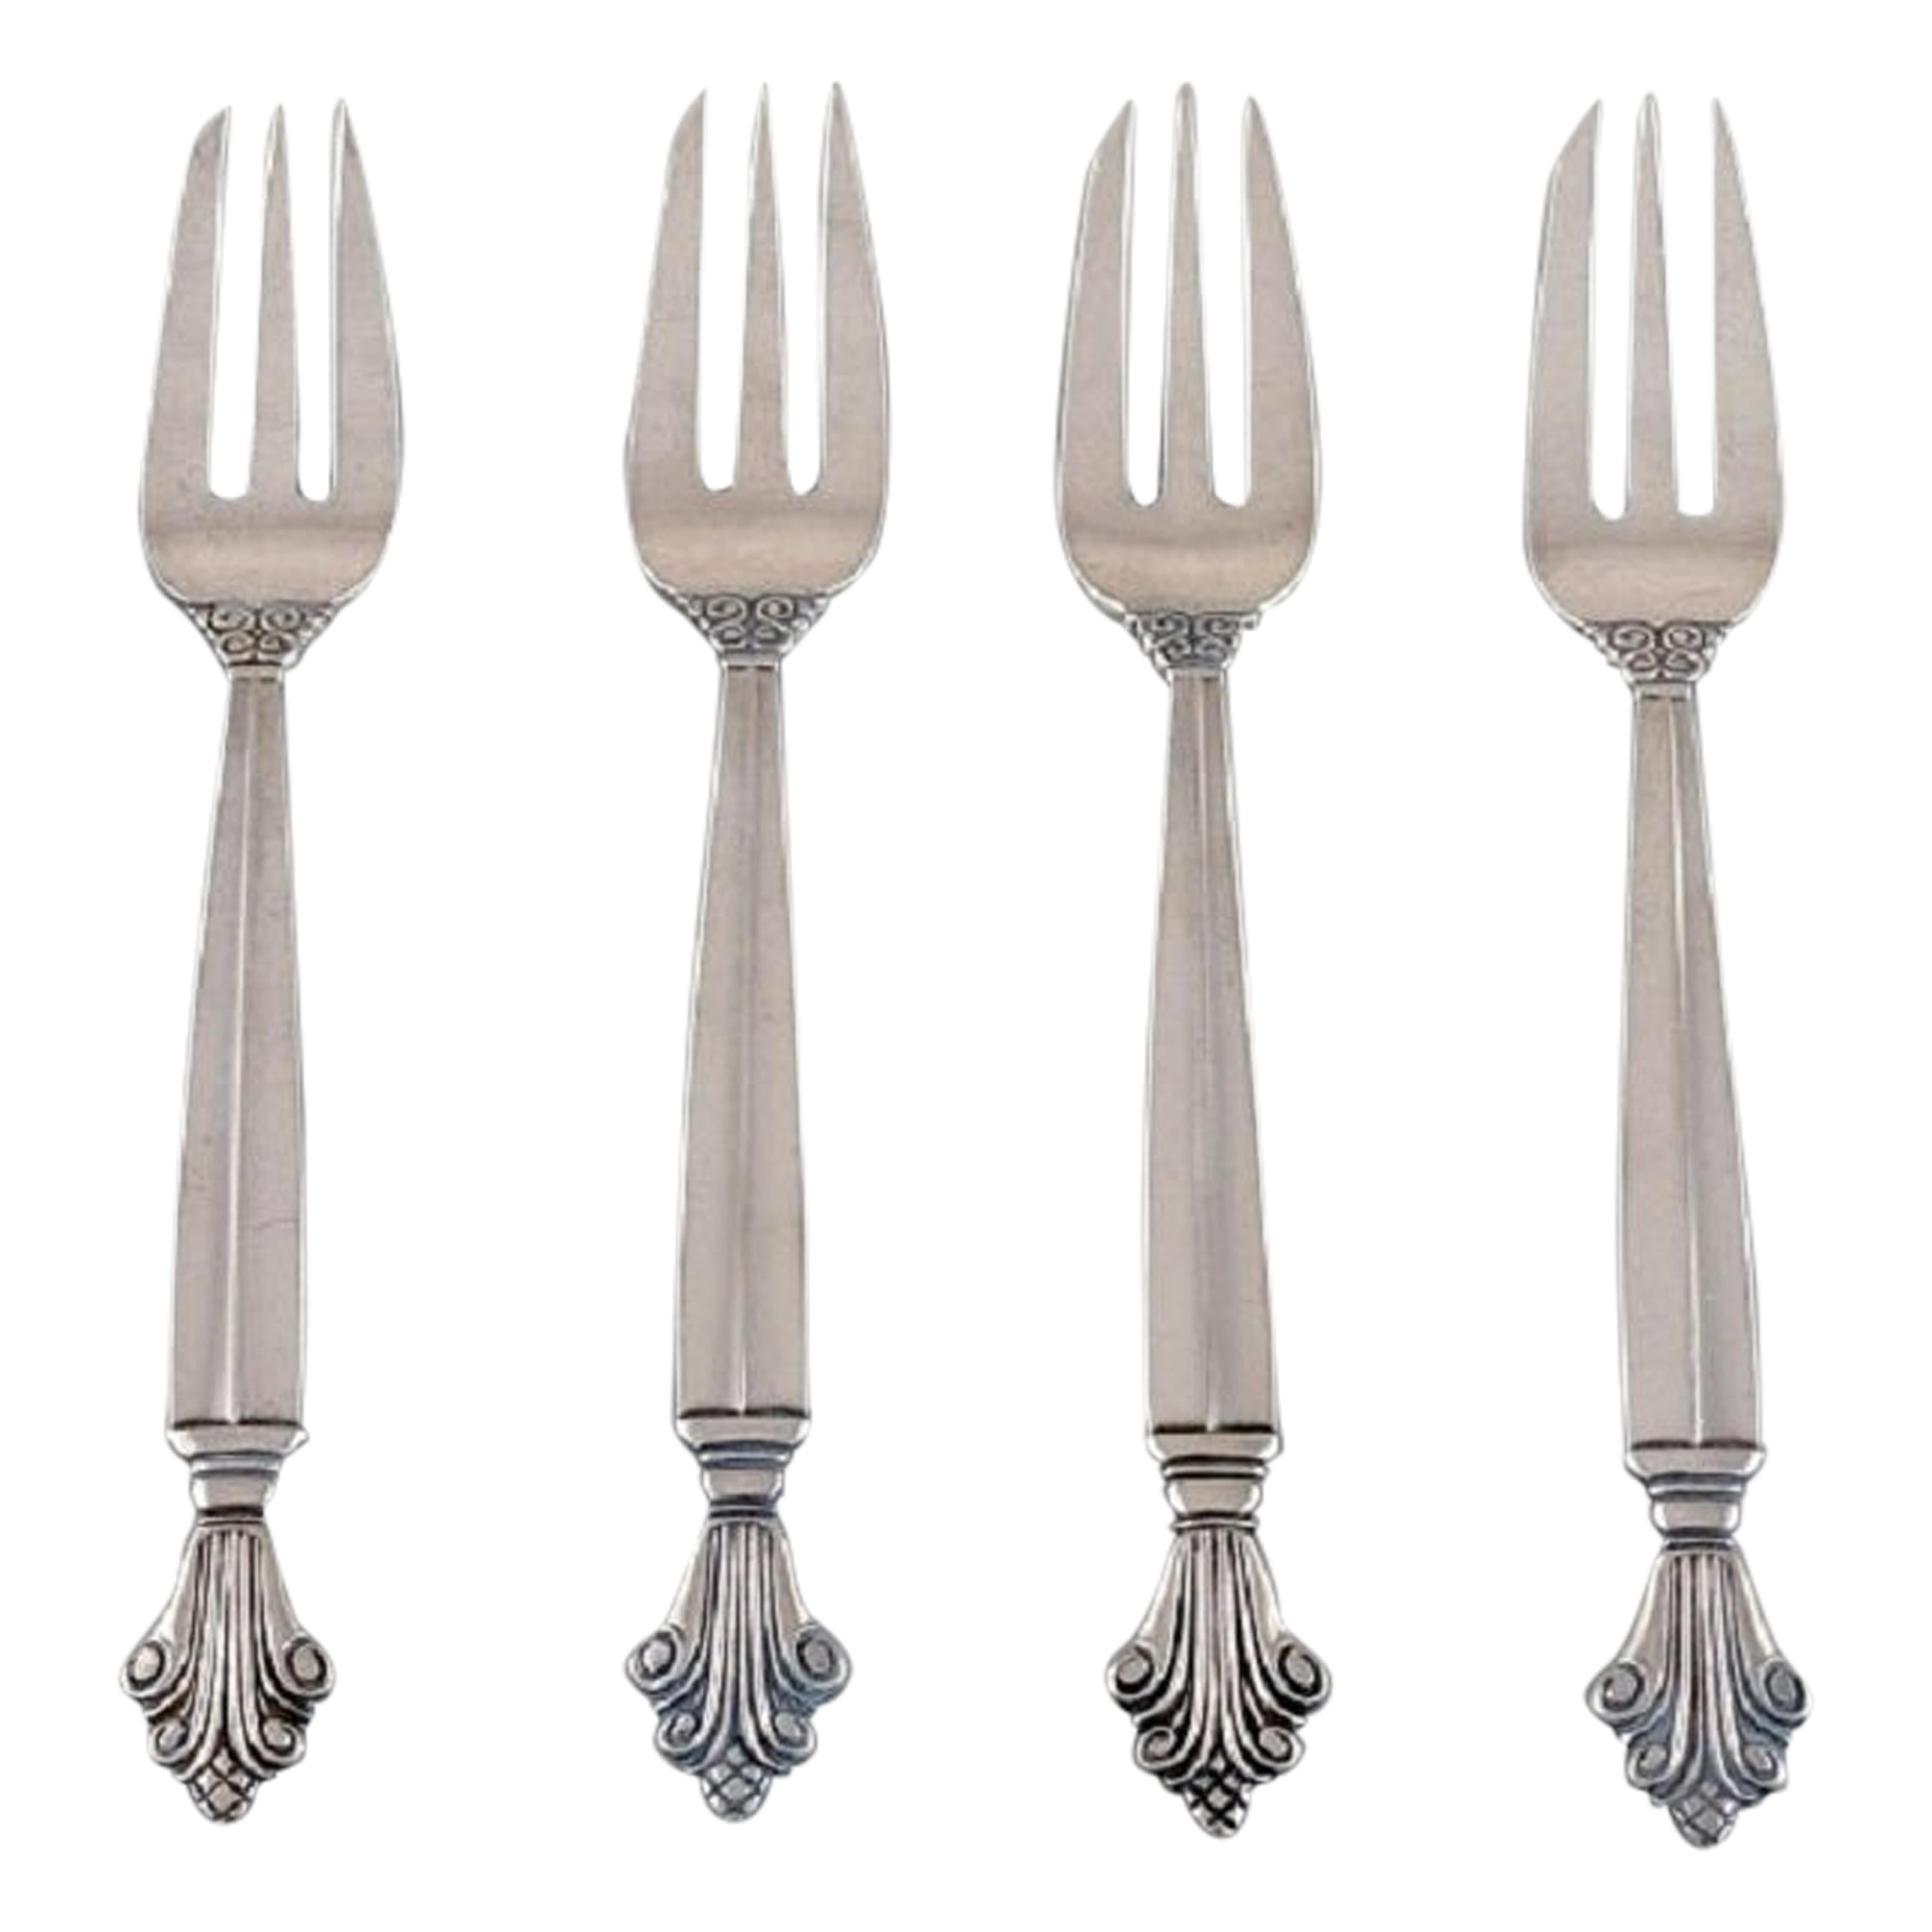 Four Georg Jensen Acanthus Pastry Forks in Sterling Silver, 1920s For Sale